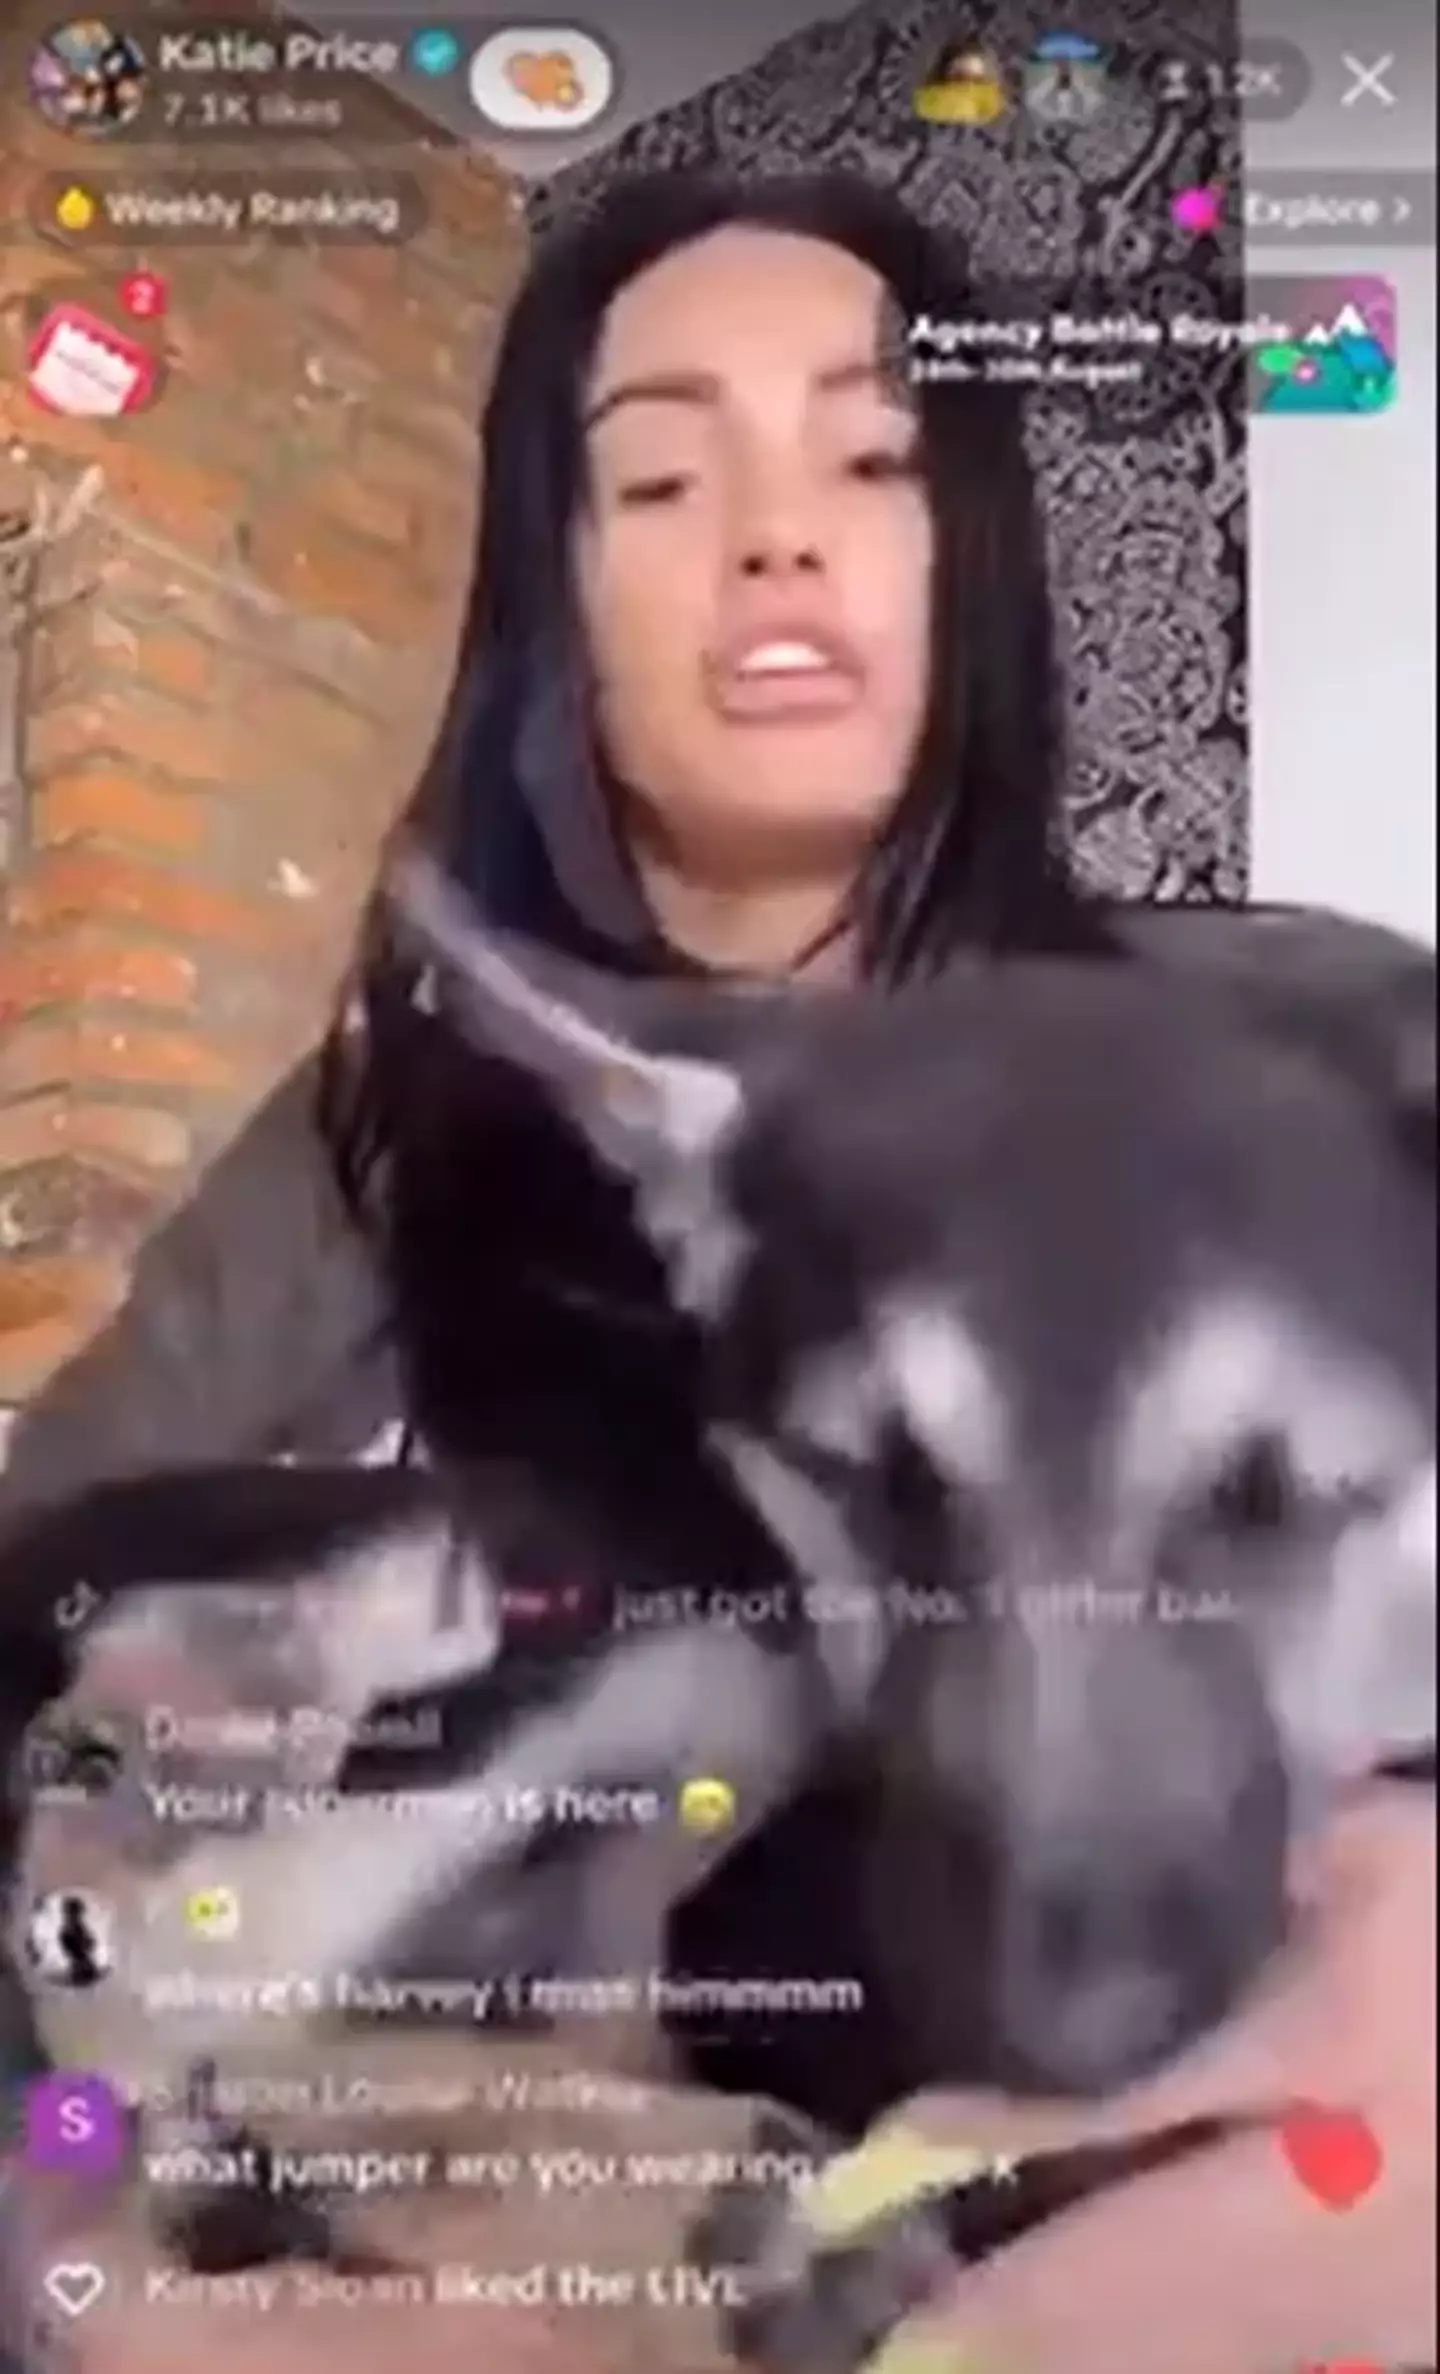 Price appears to 'hit' her dog Tank in a TikTok live video.